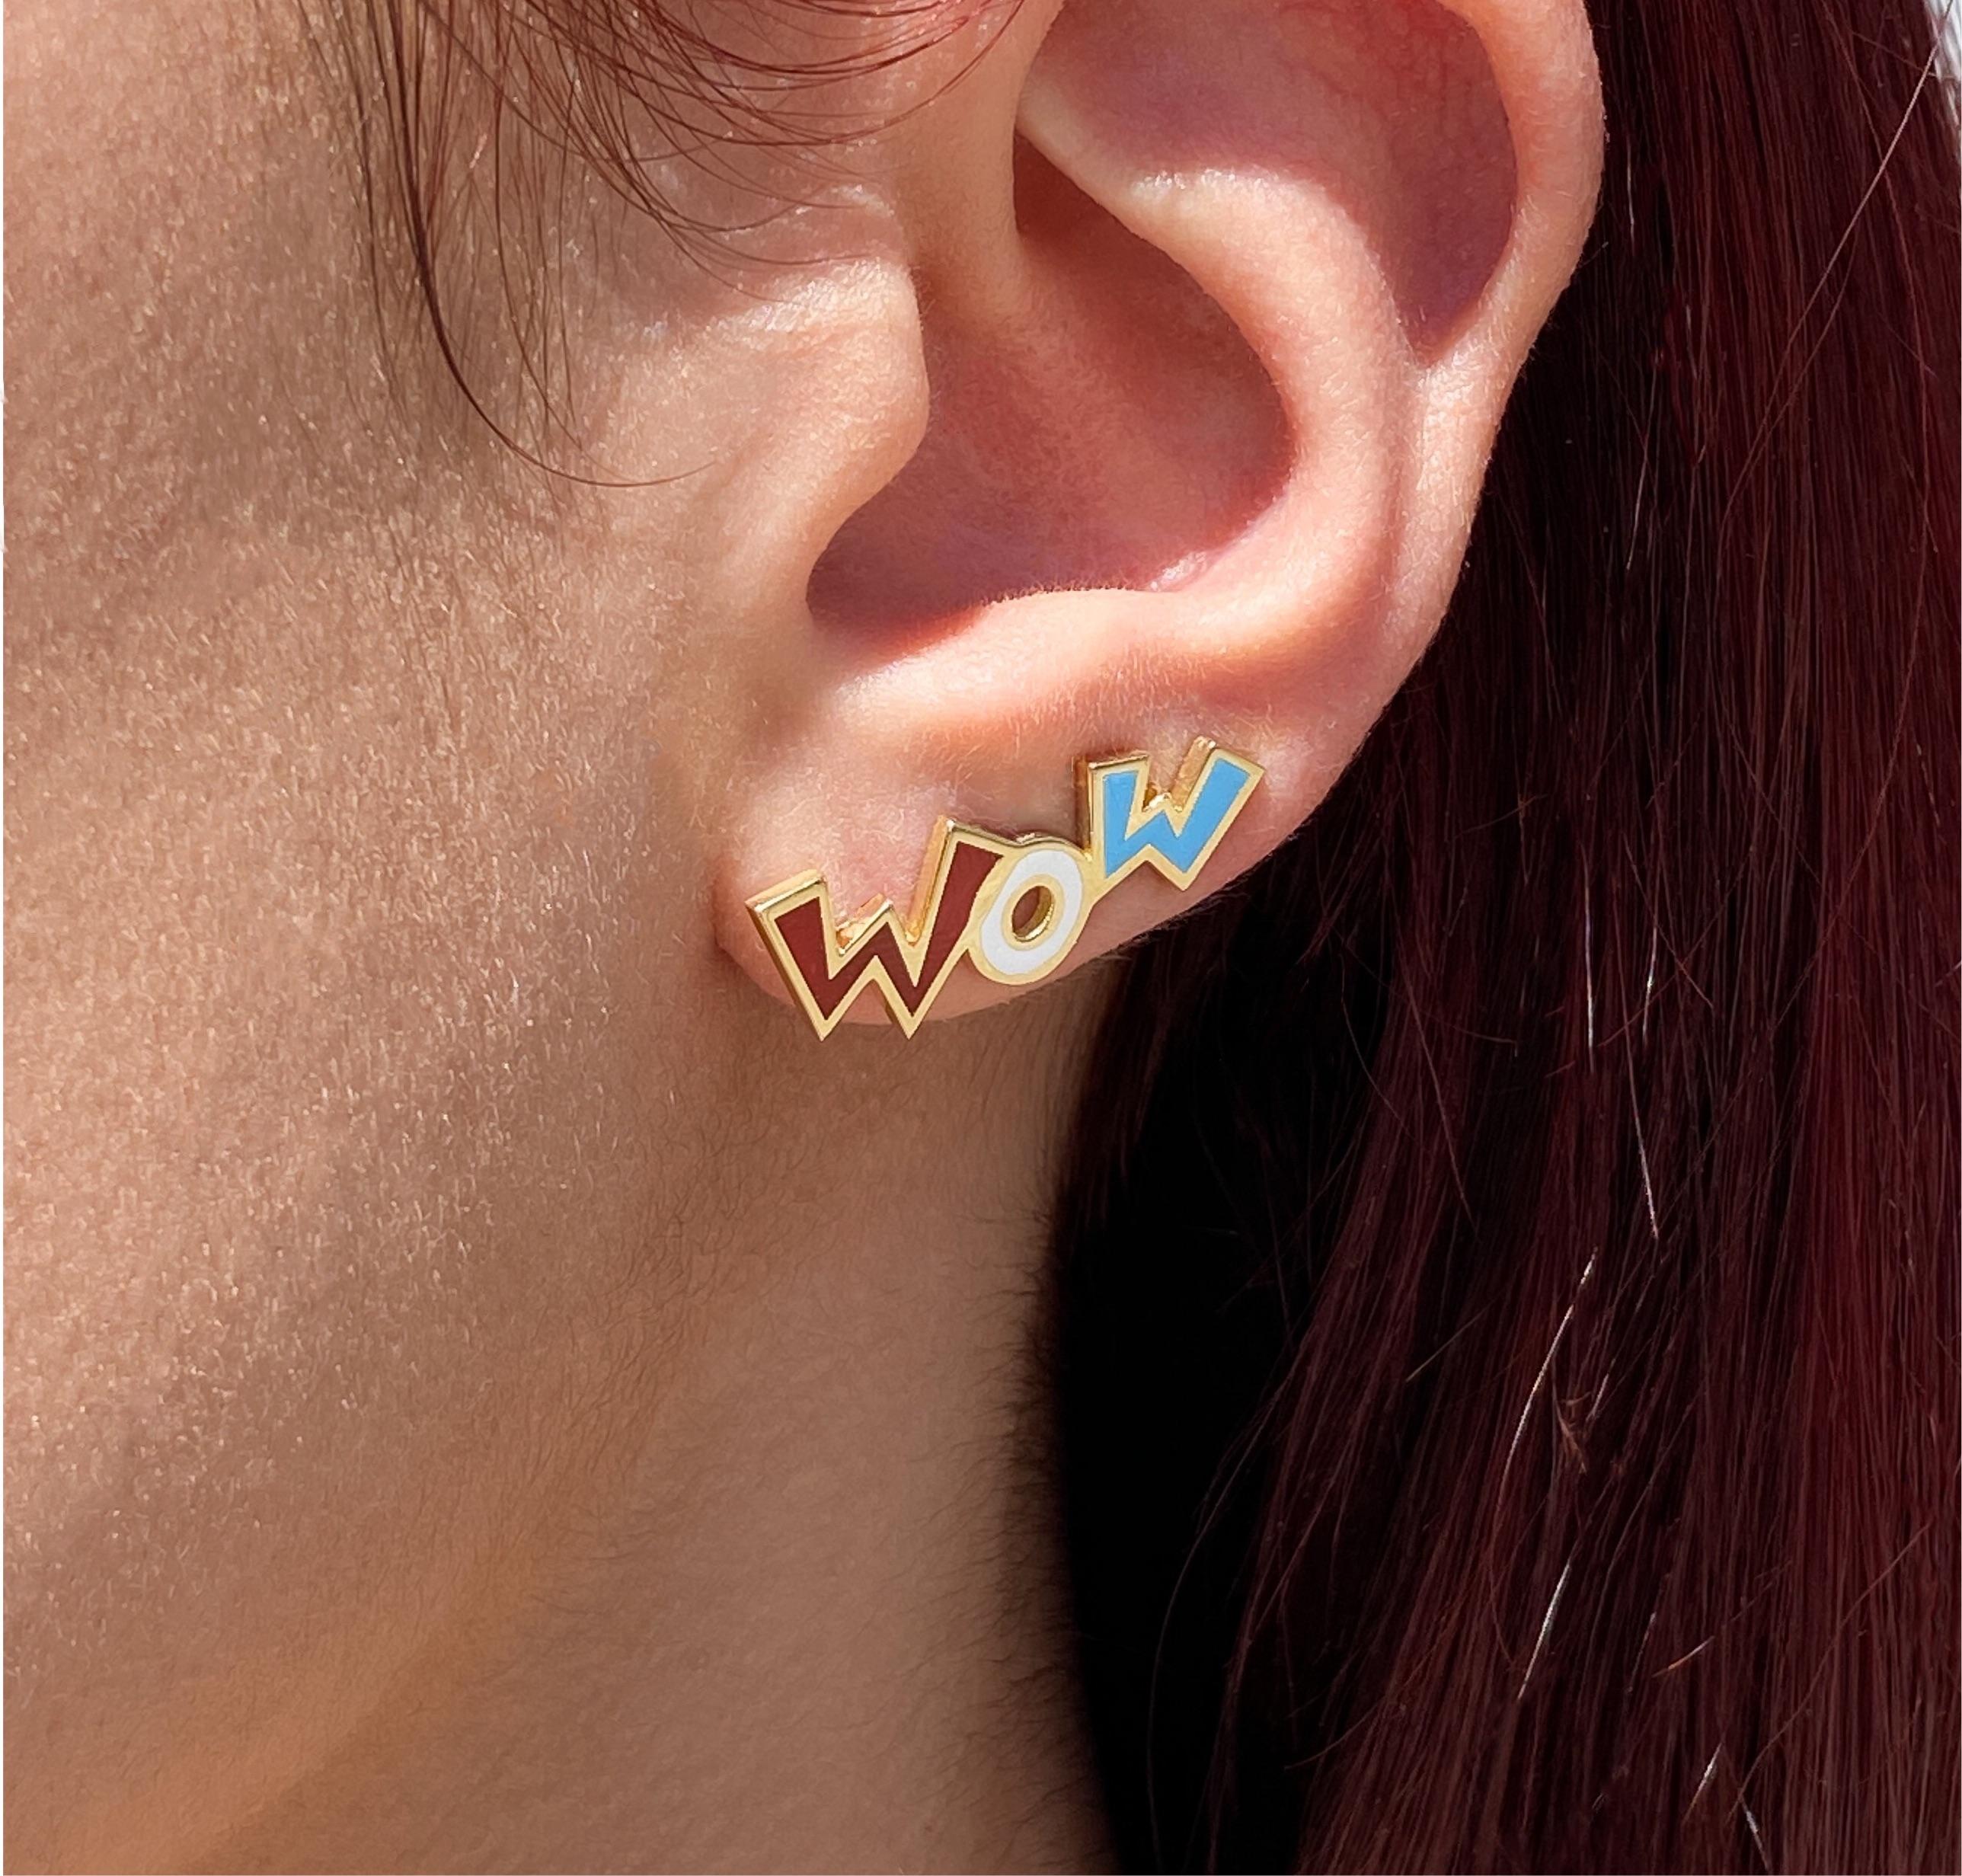 The Wow, ear climbers are crafted in 18K yellow gold, hallmarked in Cyprus. These fun and colourful climbers come in a highly polished finish and feature red, white and blue enamel. They are very comfortable on the ear and are securely held in place